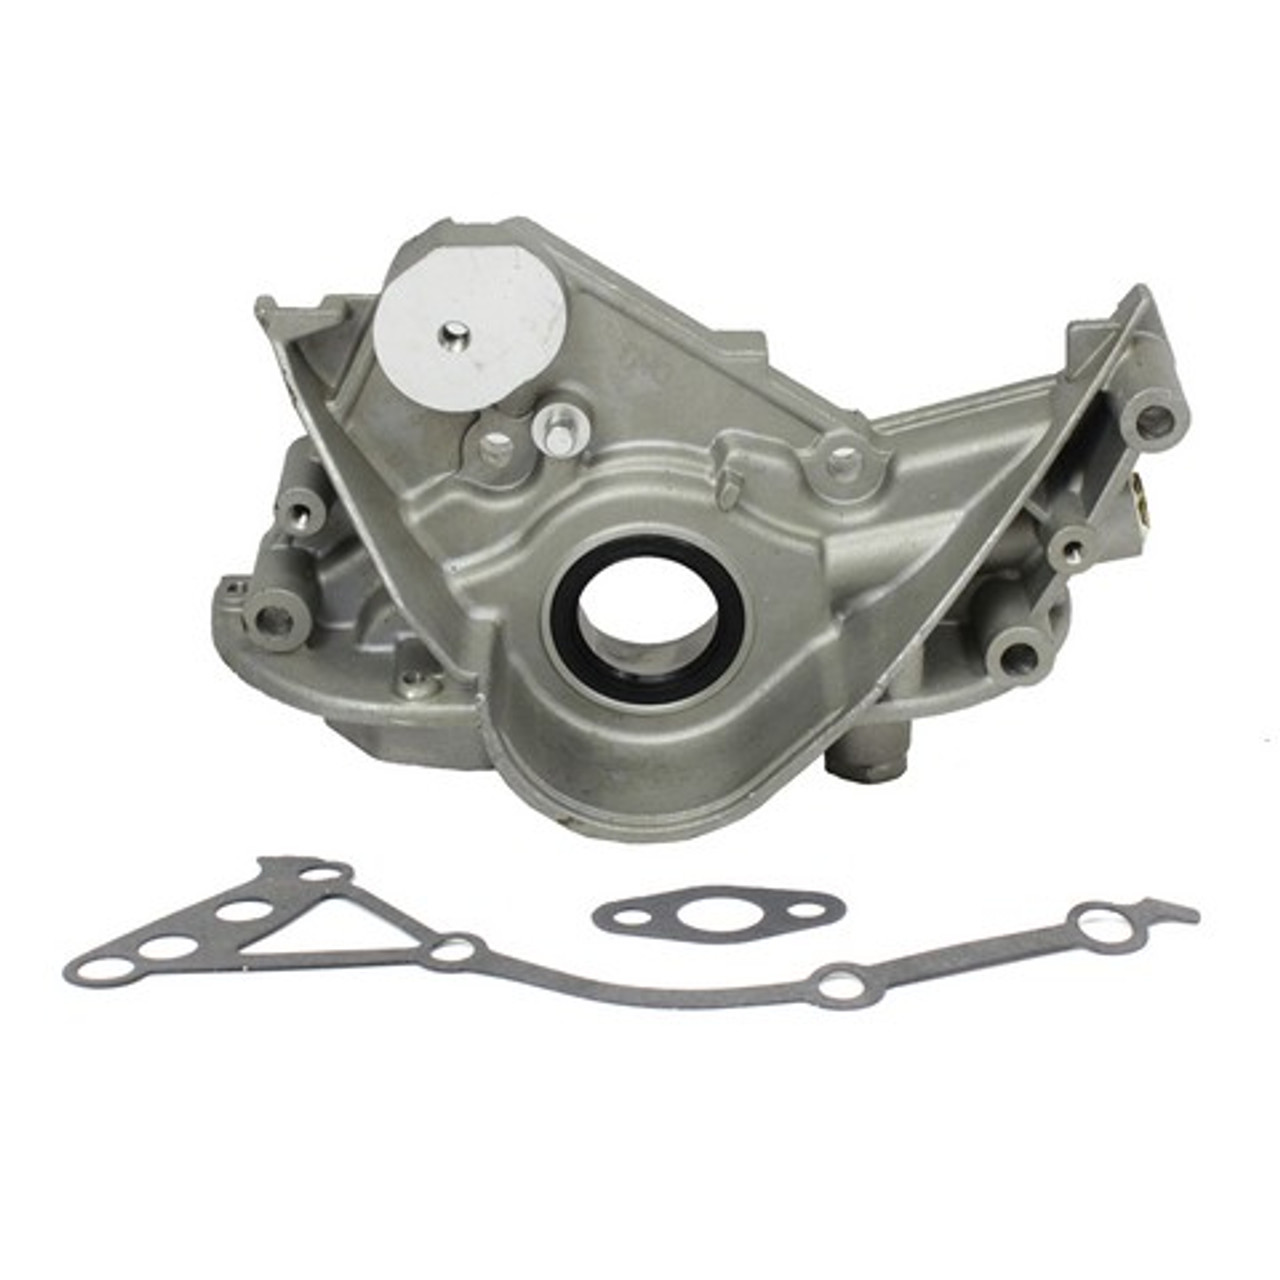 Oil Pump 3.0L 1997 Plymouth Voyager - OP125.92